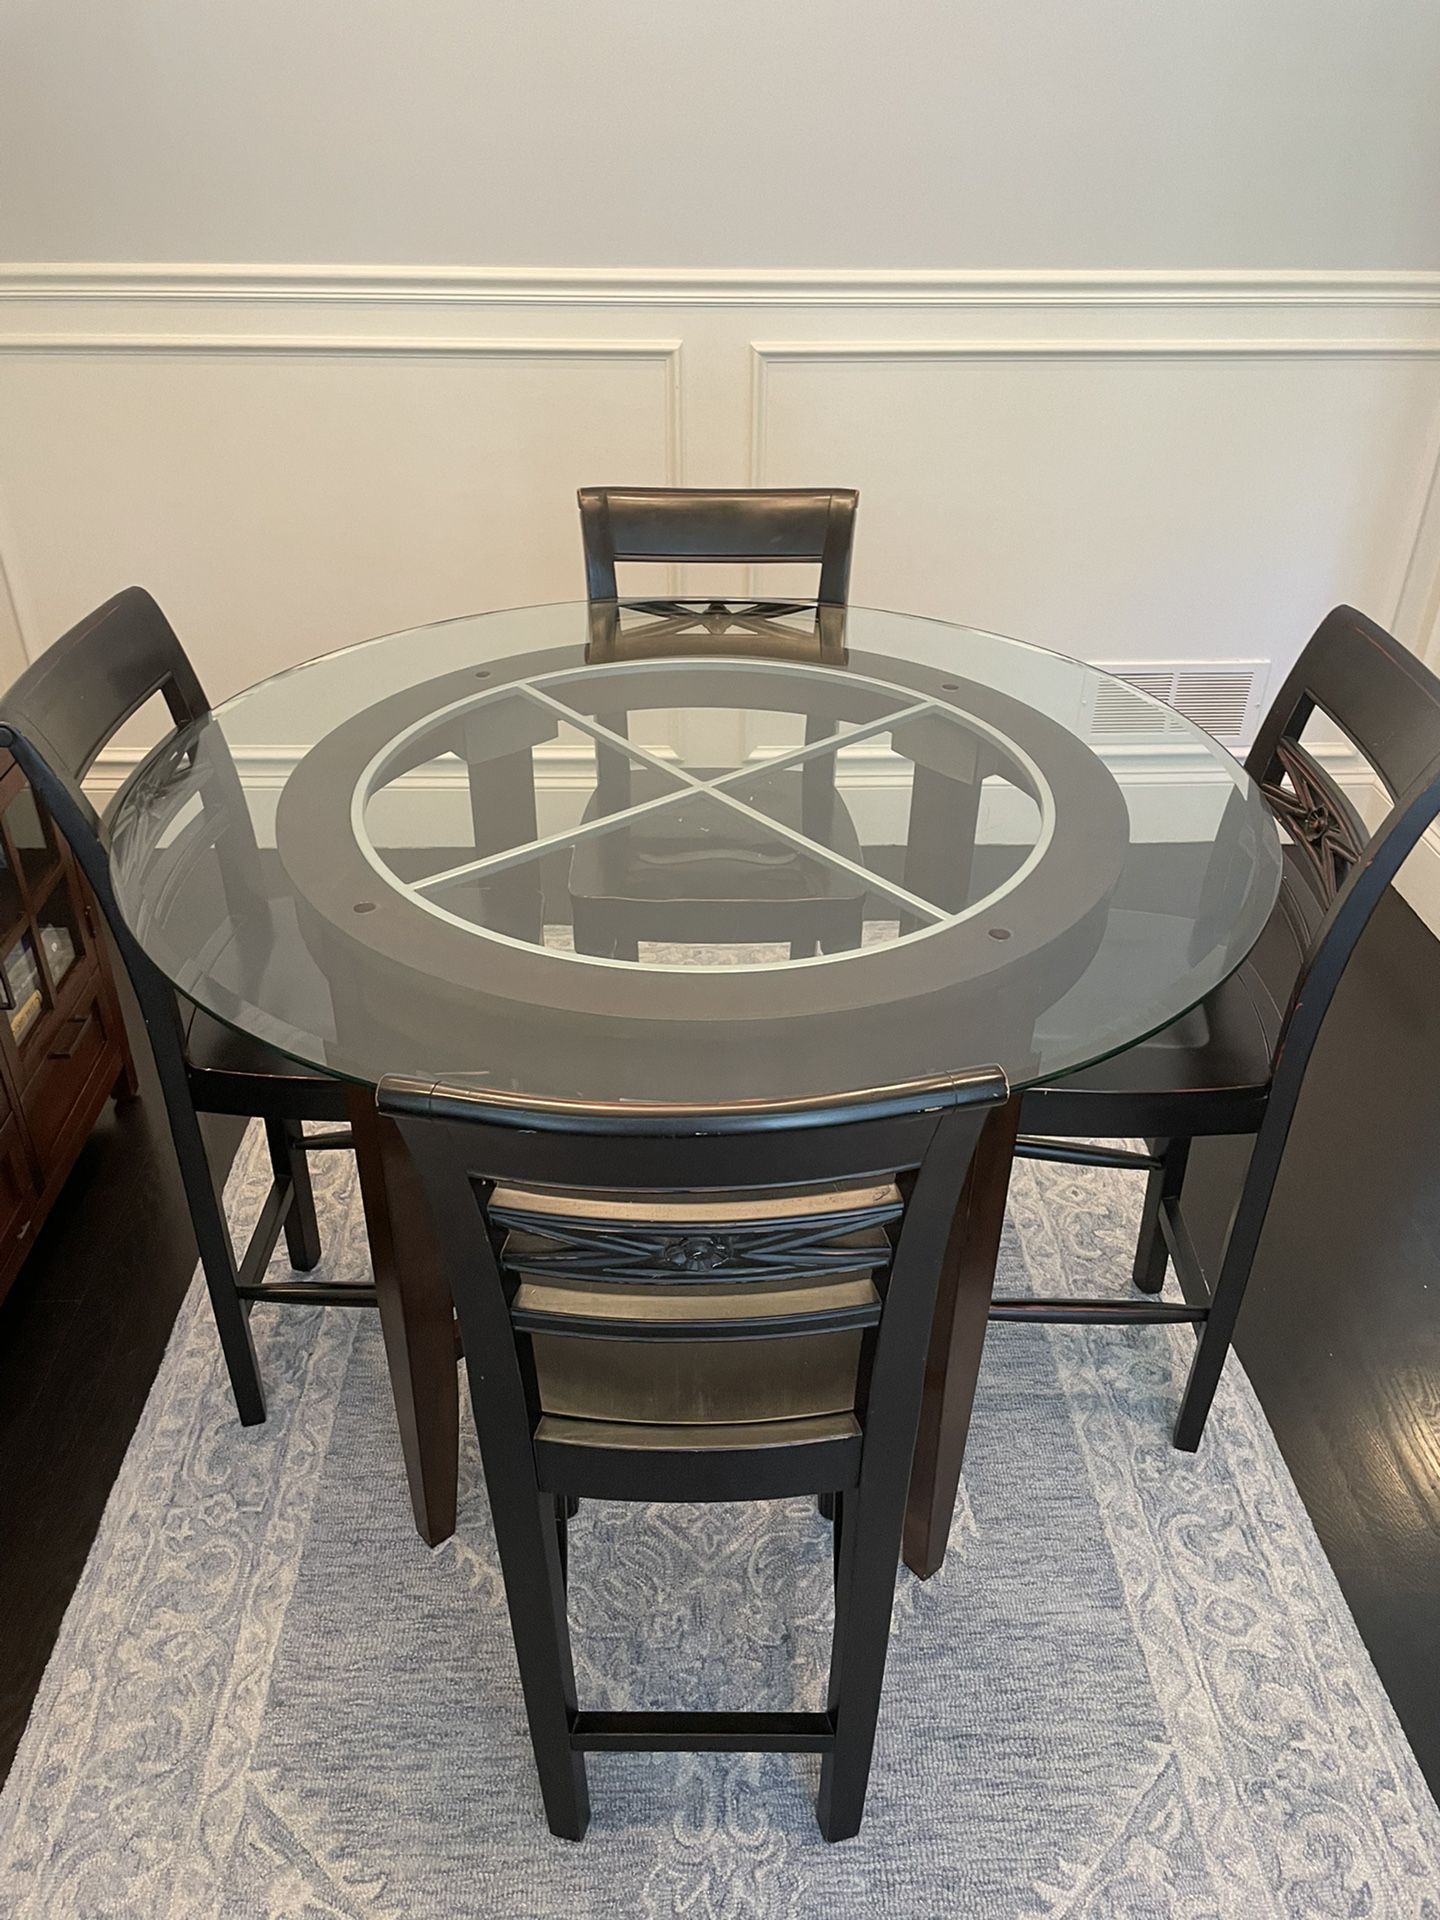 4 Person Glass Round Table With Chairs 